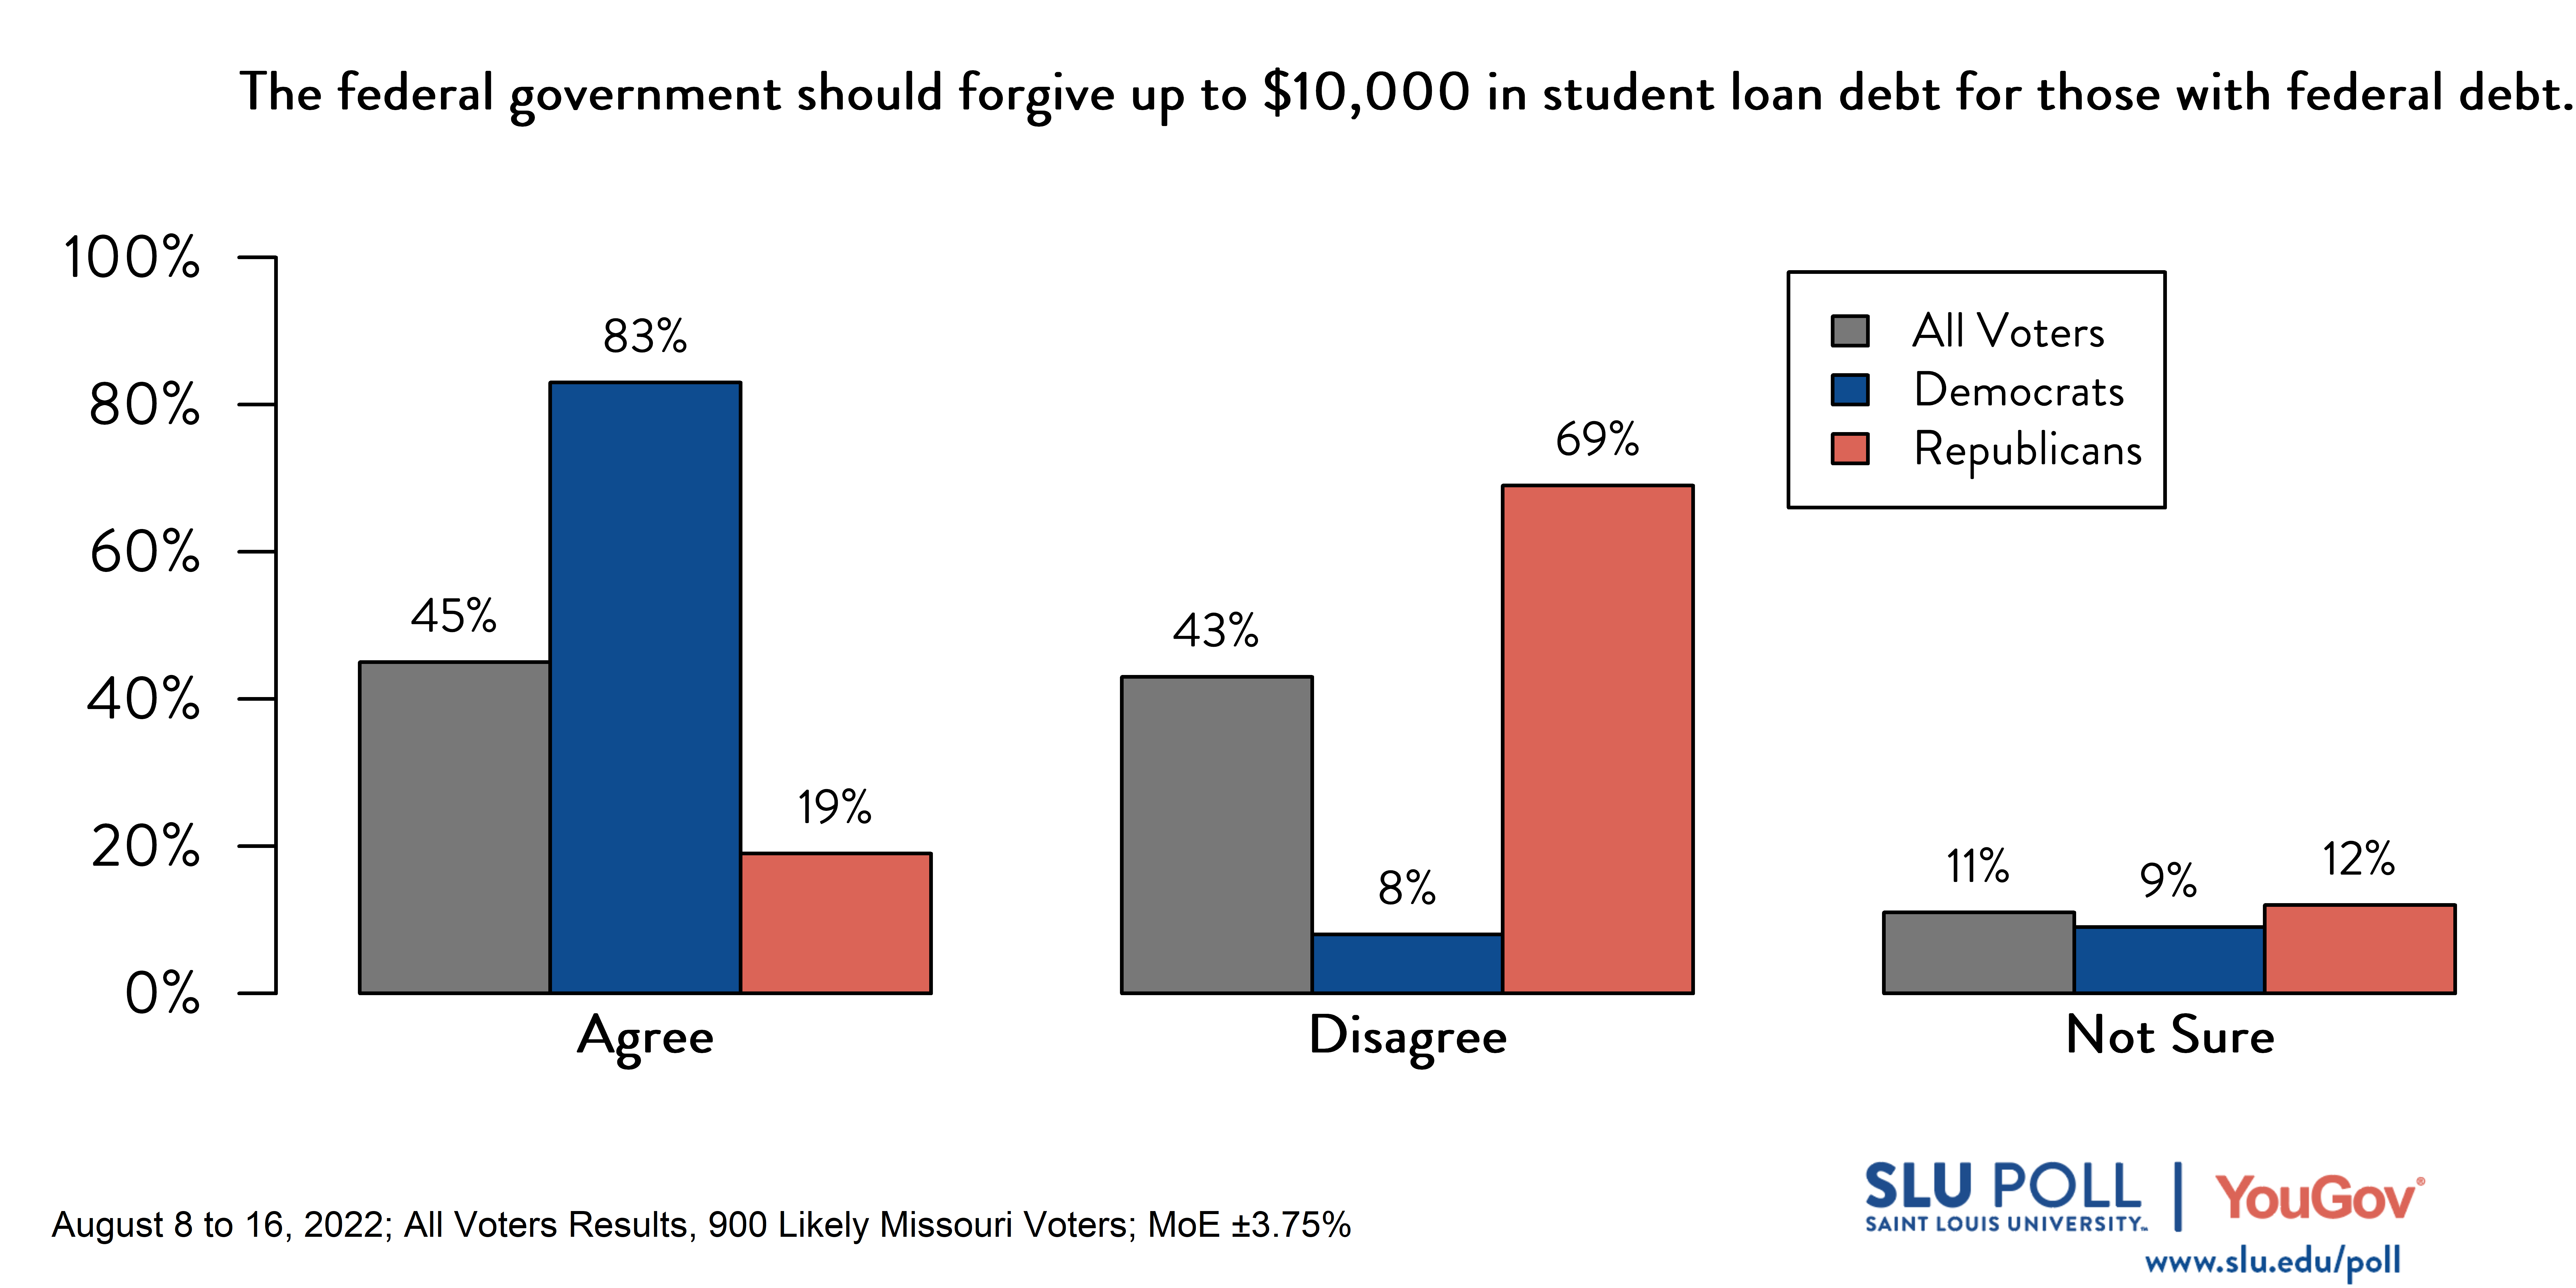 Likely voters' responses to 'Do you agree or disagree with the following statements? The federal government should forgive up to $10,000 in student loan debt for those with federal debt.': 45% Agree, 43% Disagree, and 11% Not Sure. Democratic voters' responses: ' 83% Agree, 8% Disagree, and 9% Not Sure. Republican voters' responses: 19% Agree, 69% Disagree, and 12% Not Sure.